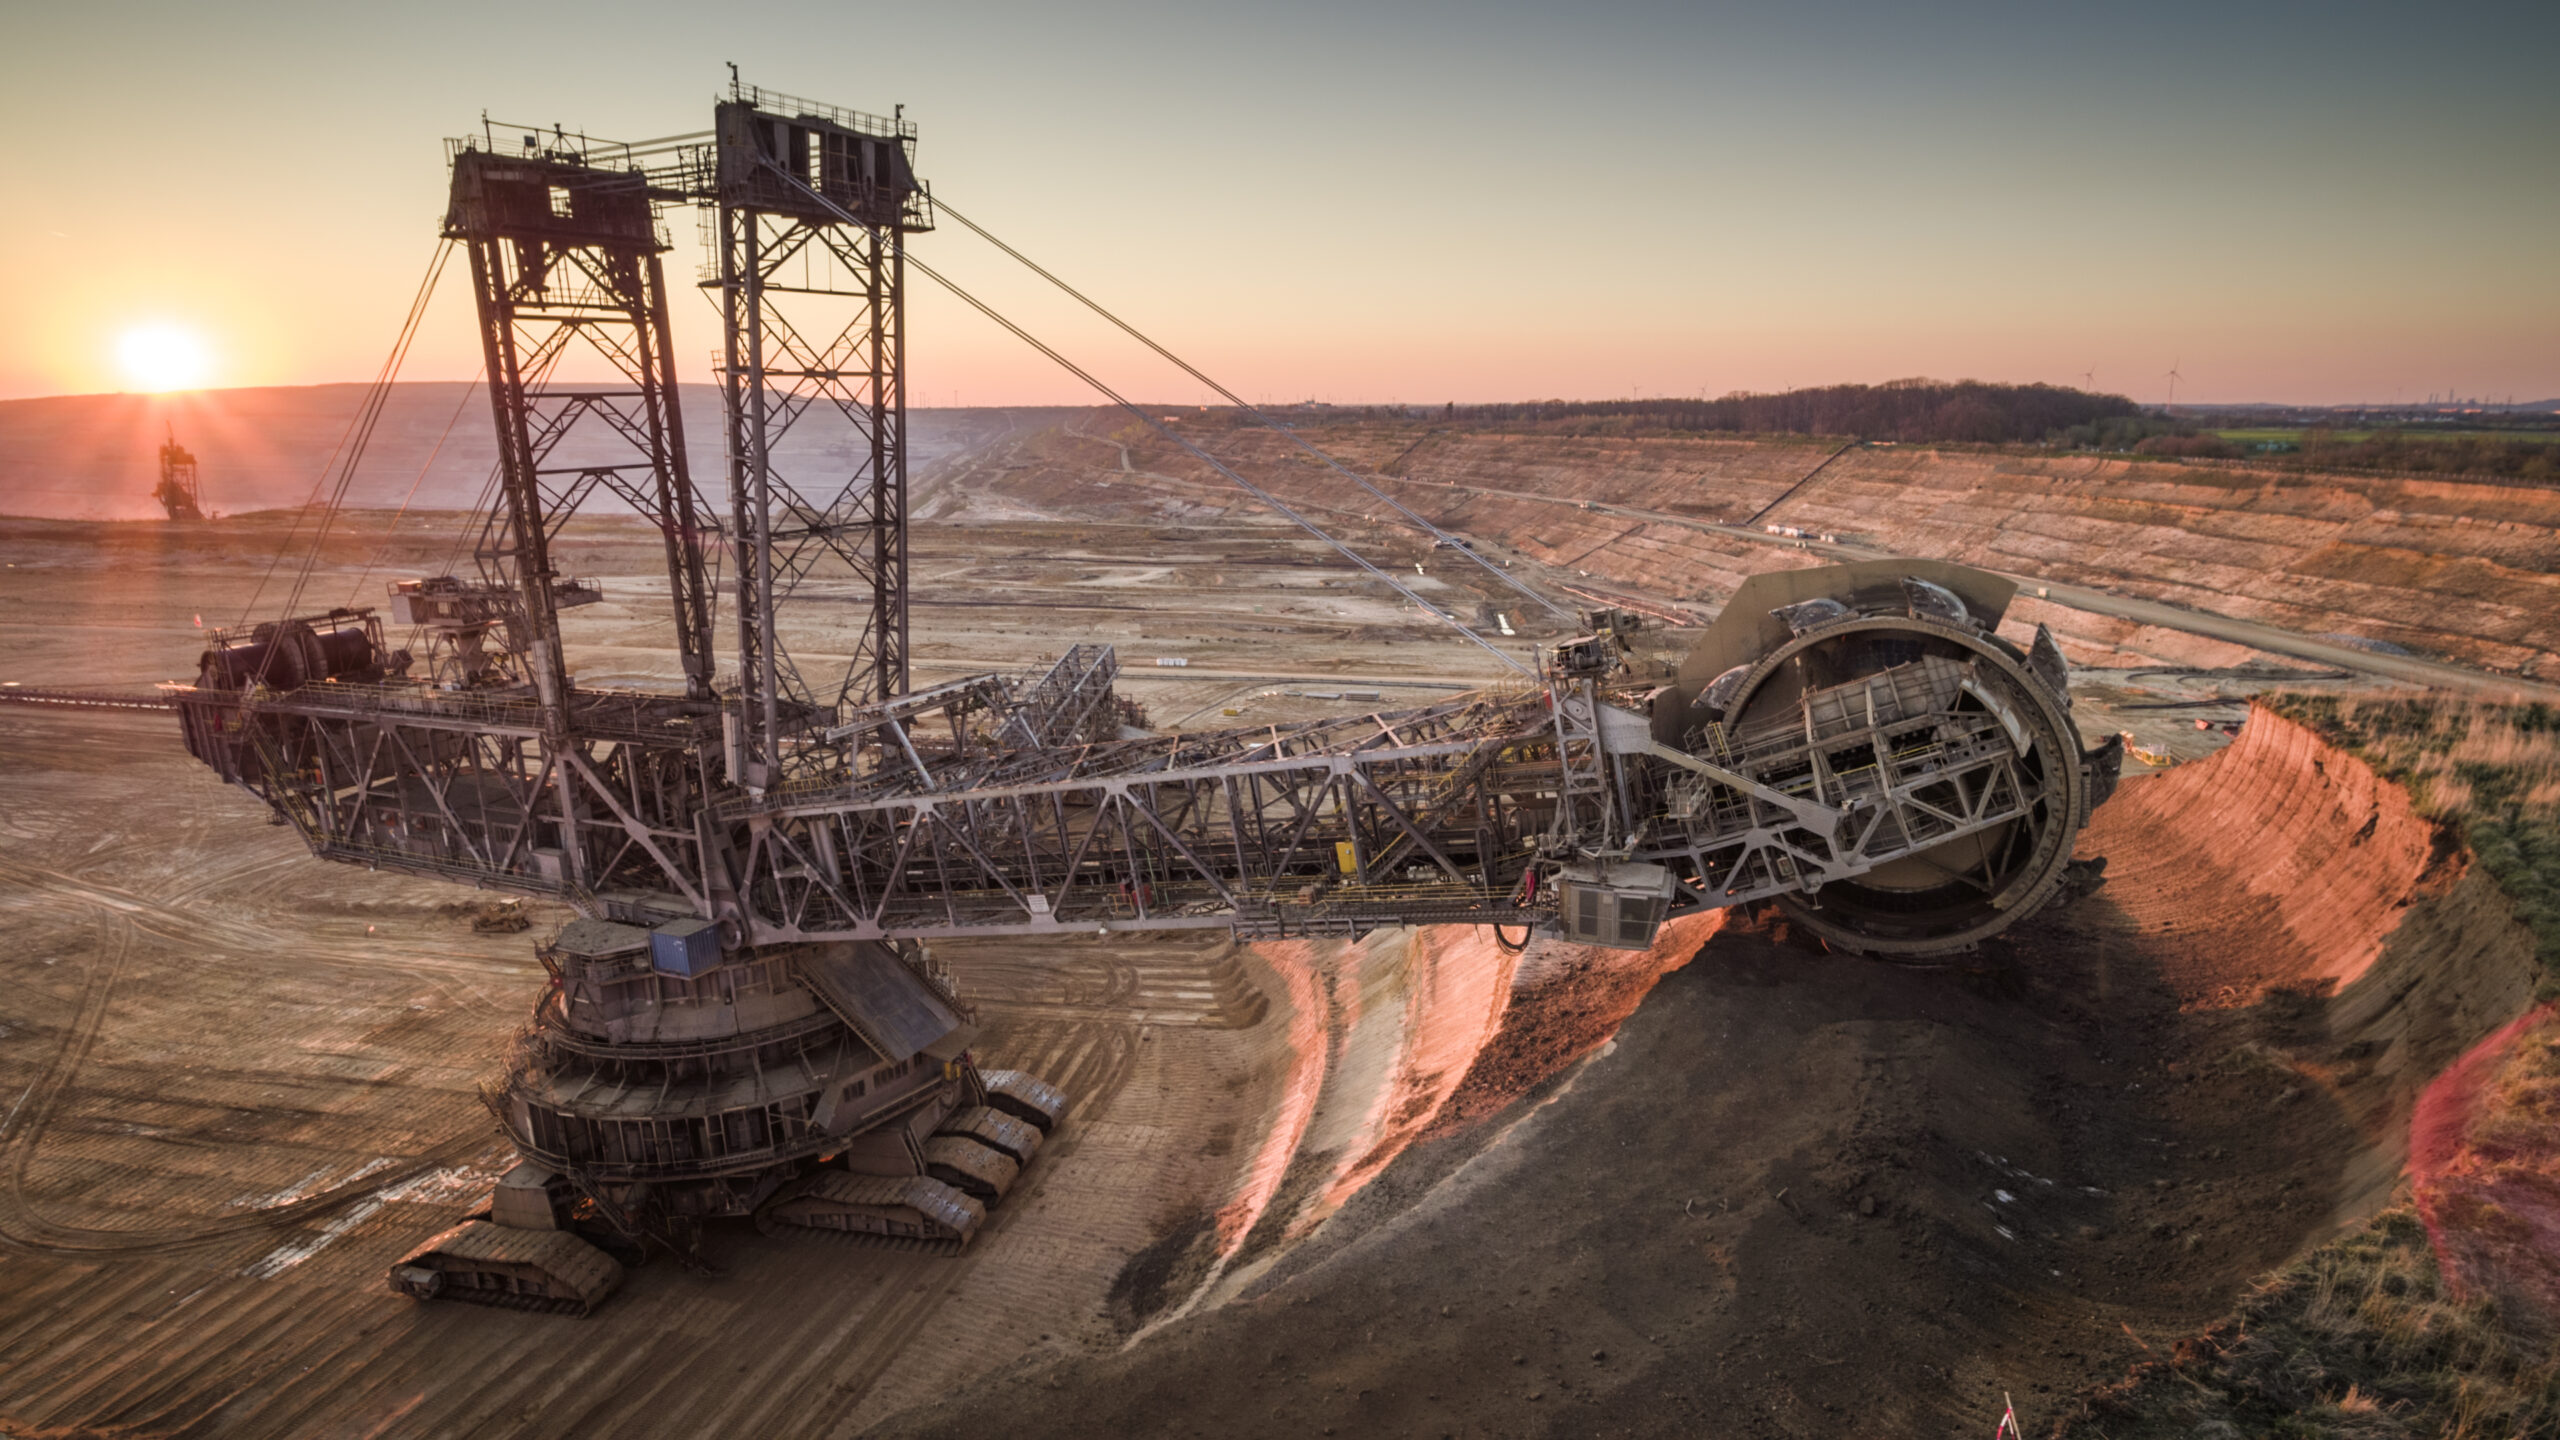 Aerial shot of a large bucket wheel excavator excavating soil in an open pit lignite mine in Germany at sunset.